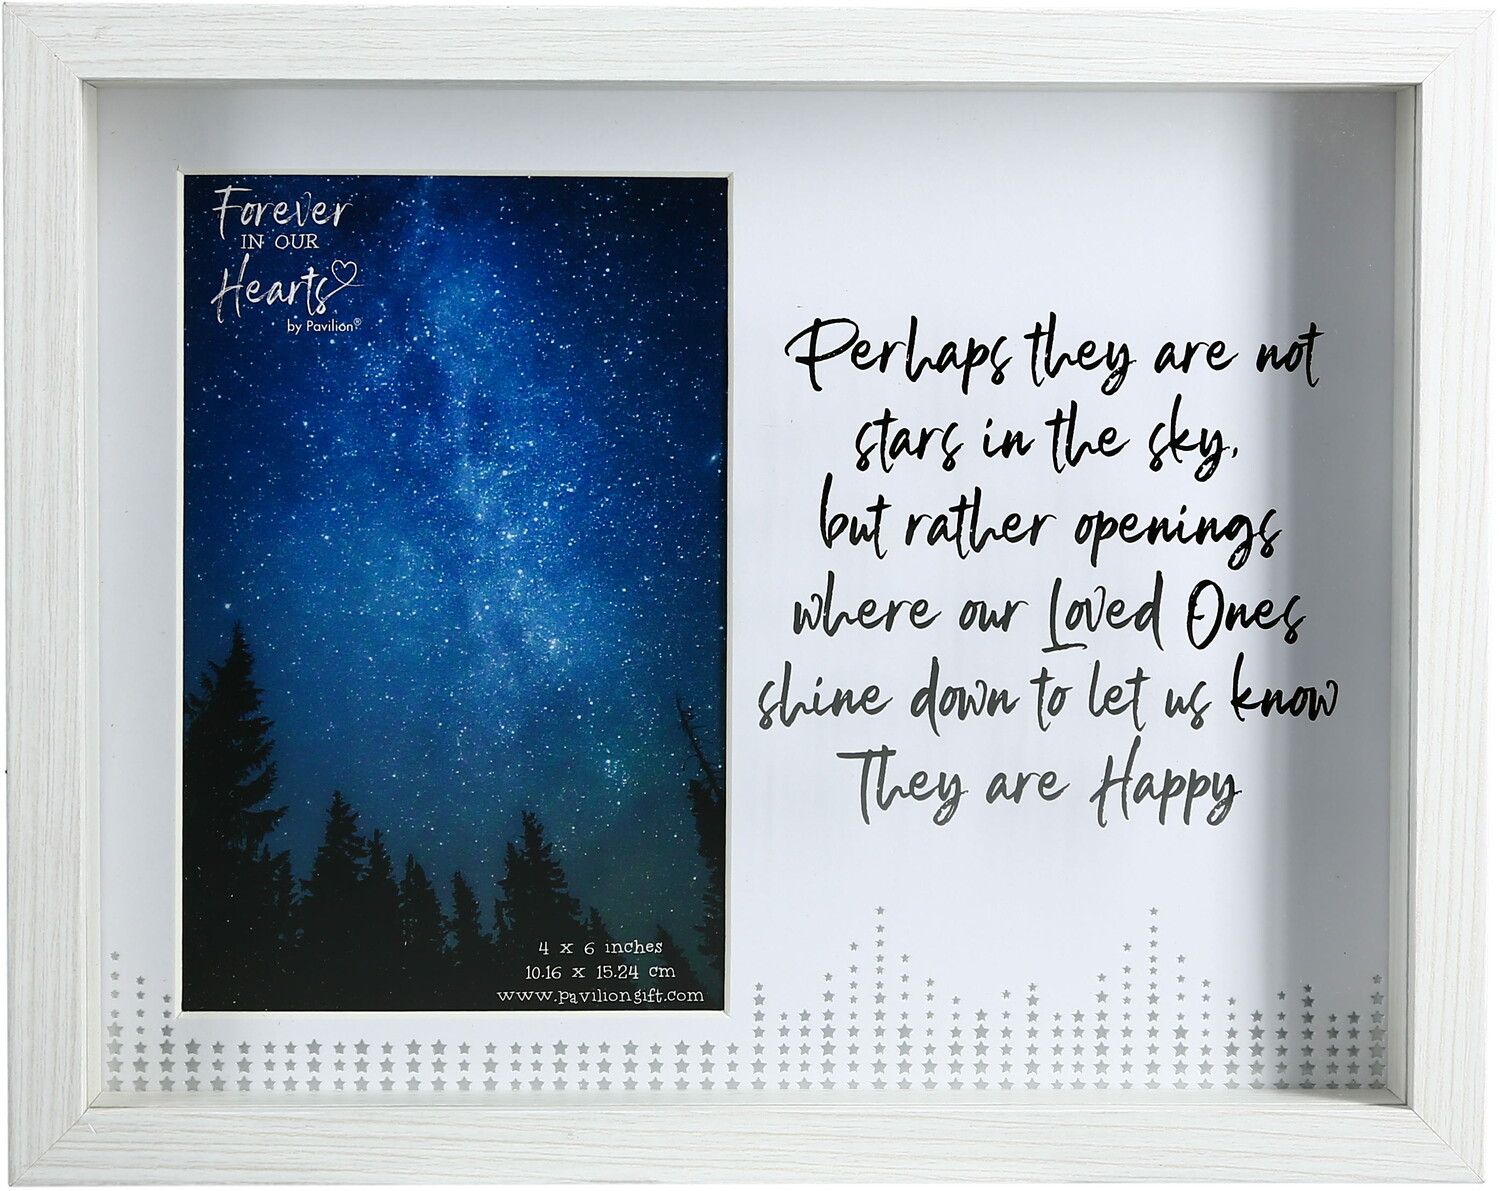 Stars by Forever in our Hearts - Stars - 9.5" x 7.5" Shadow Box Frame
(Holds 4" x 6" Photo)